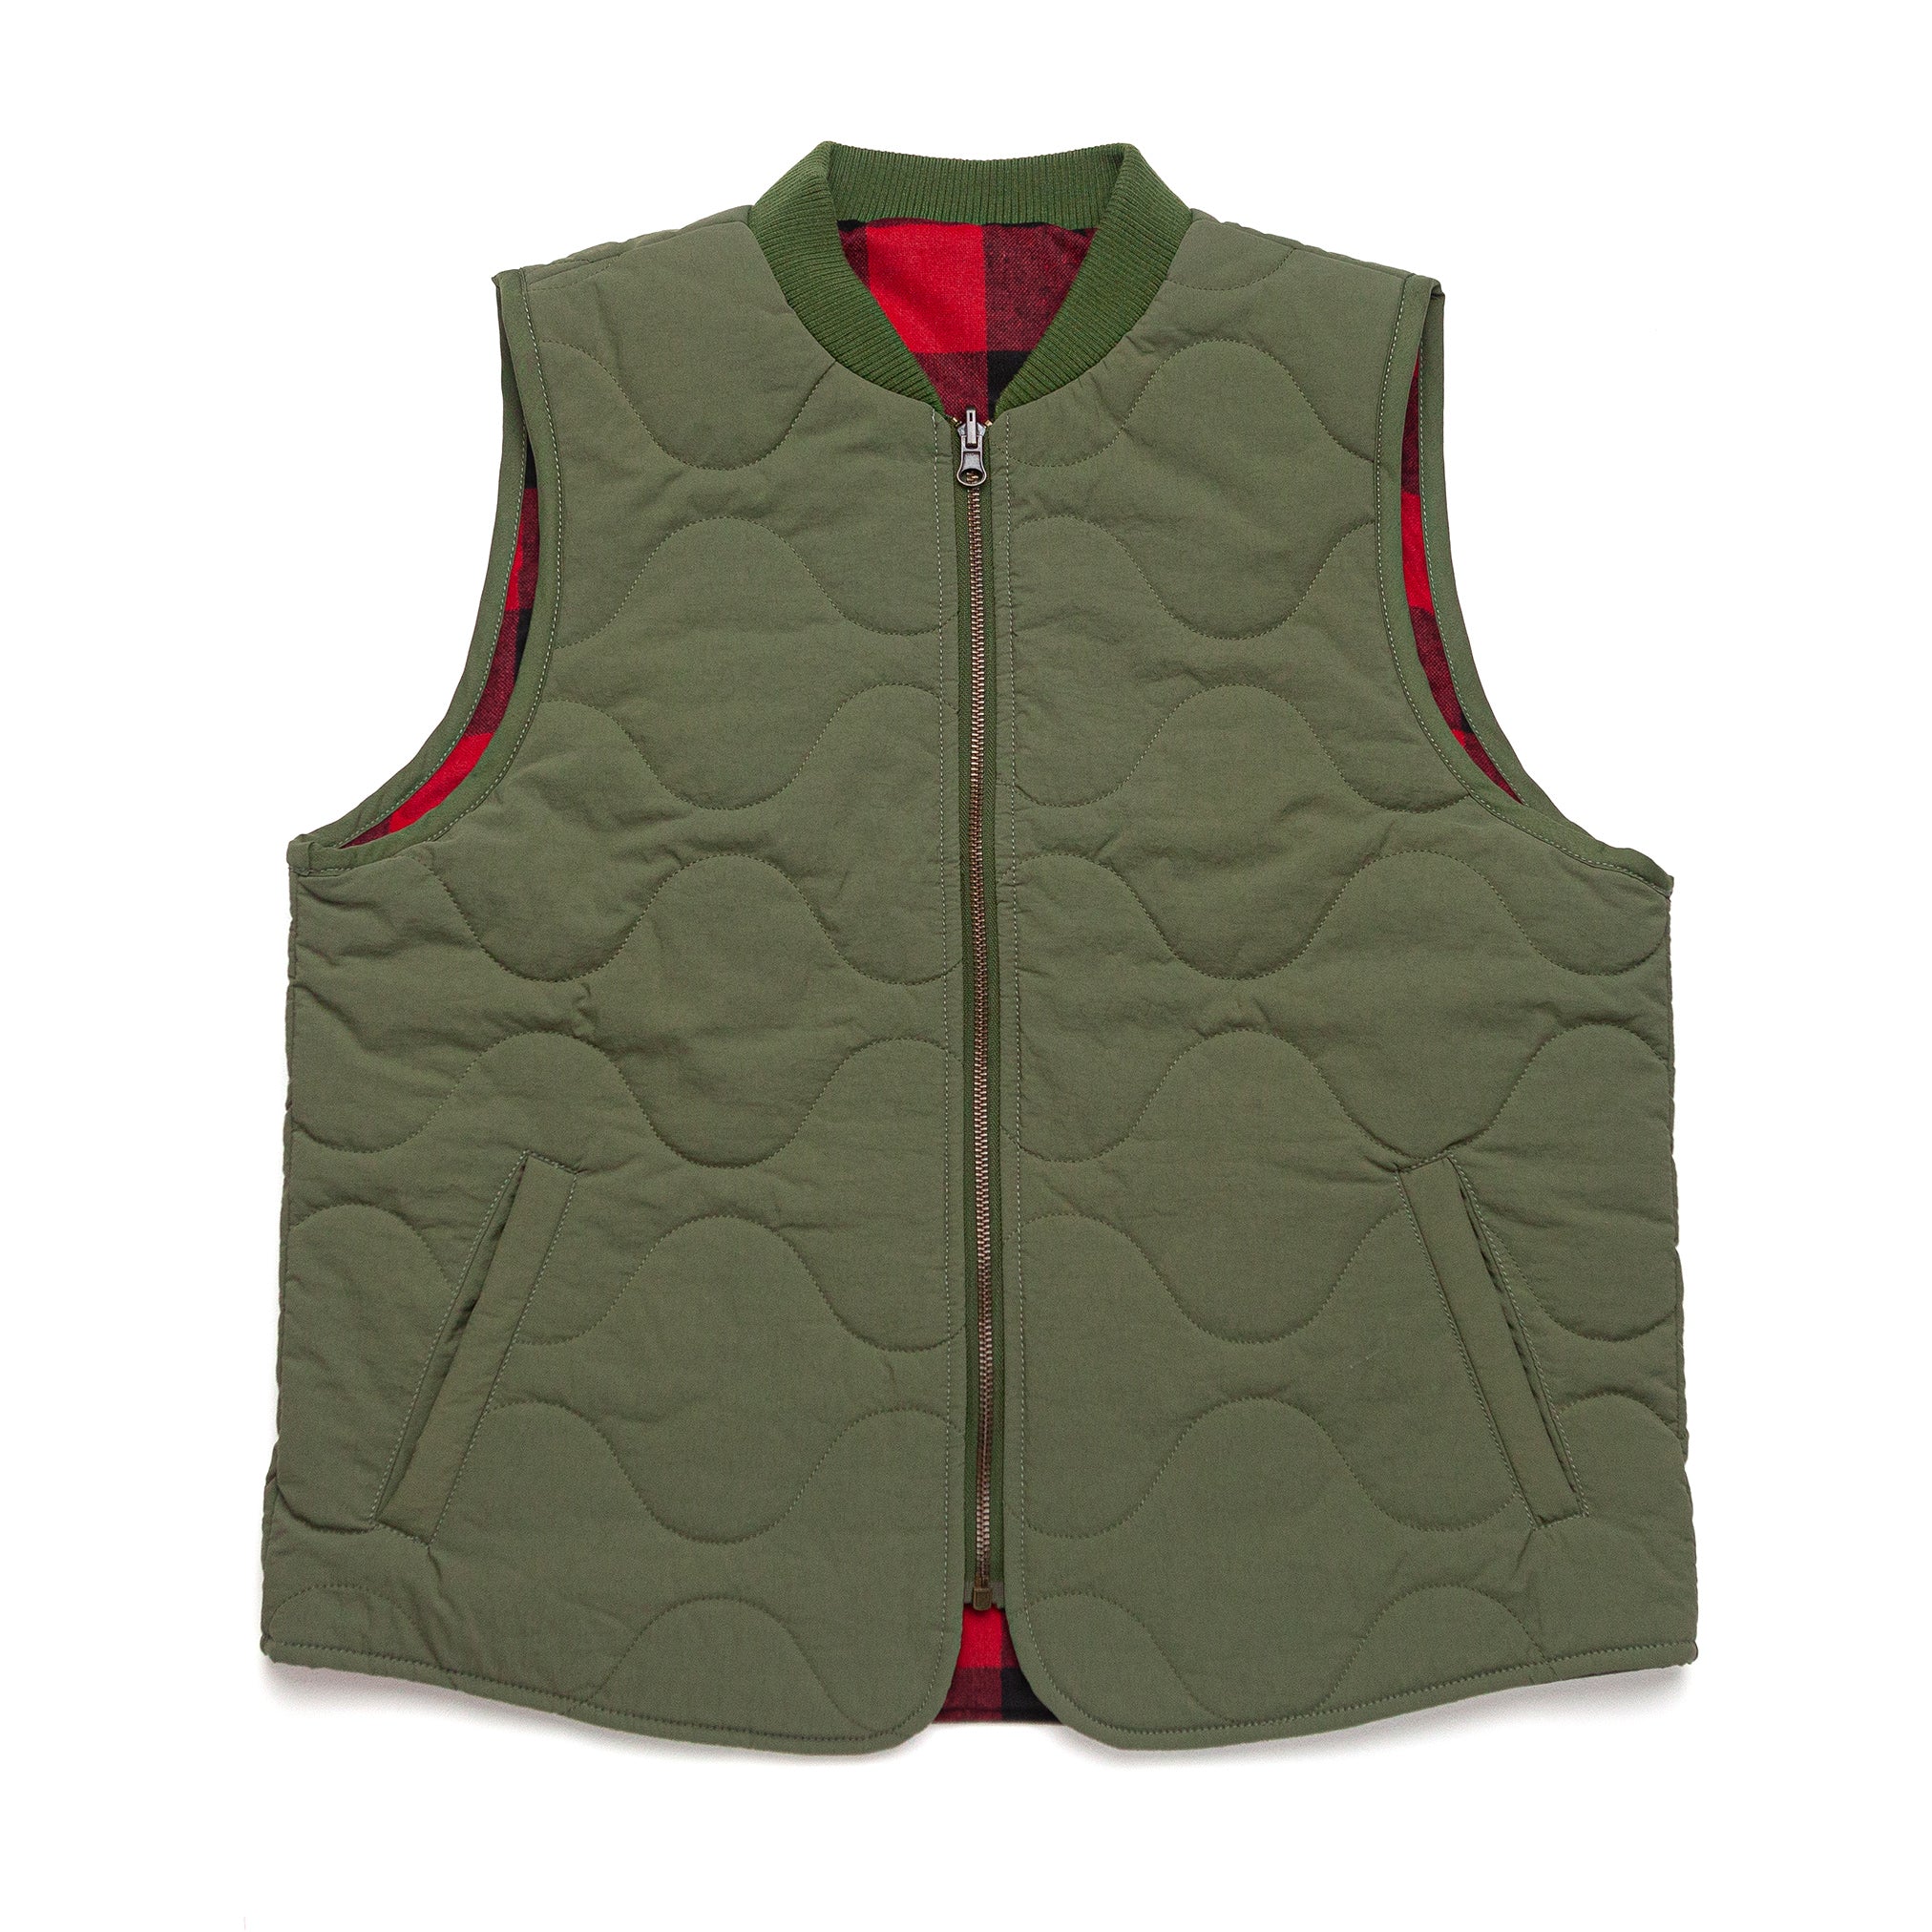 Sea Wolf Reversible Vest in Olive